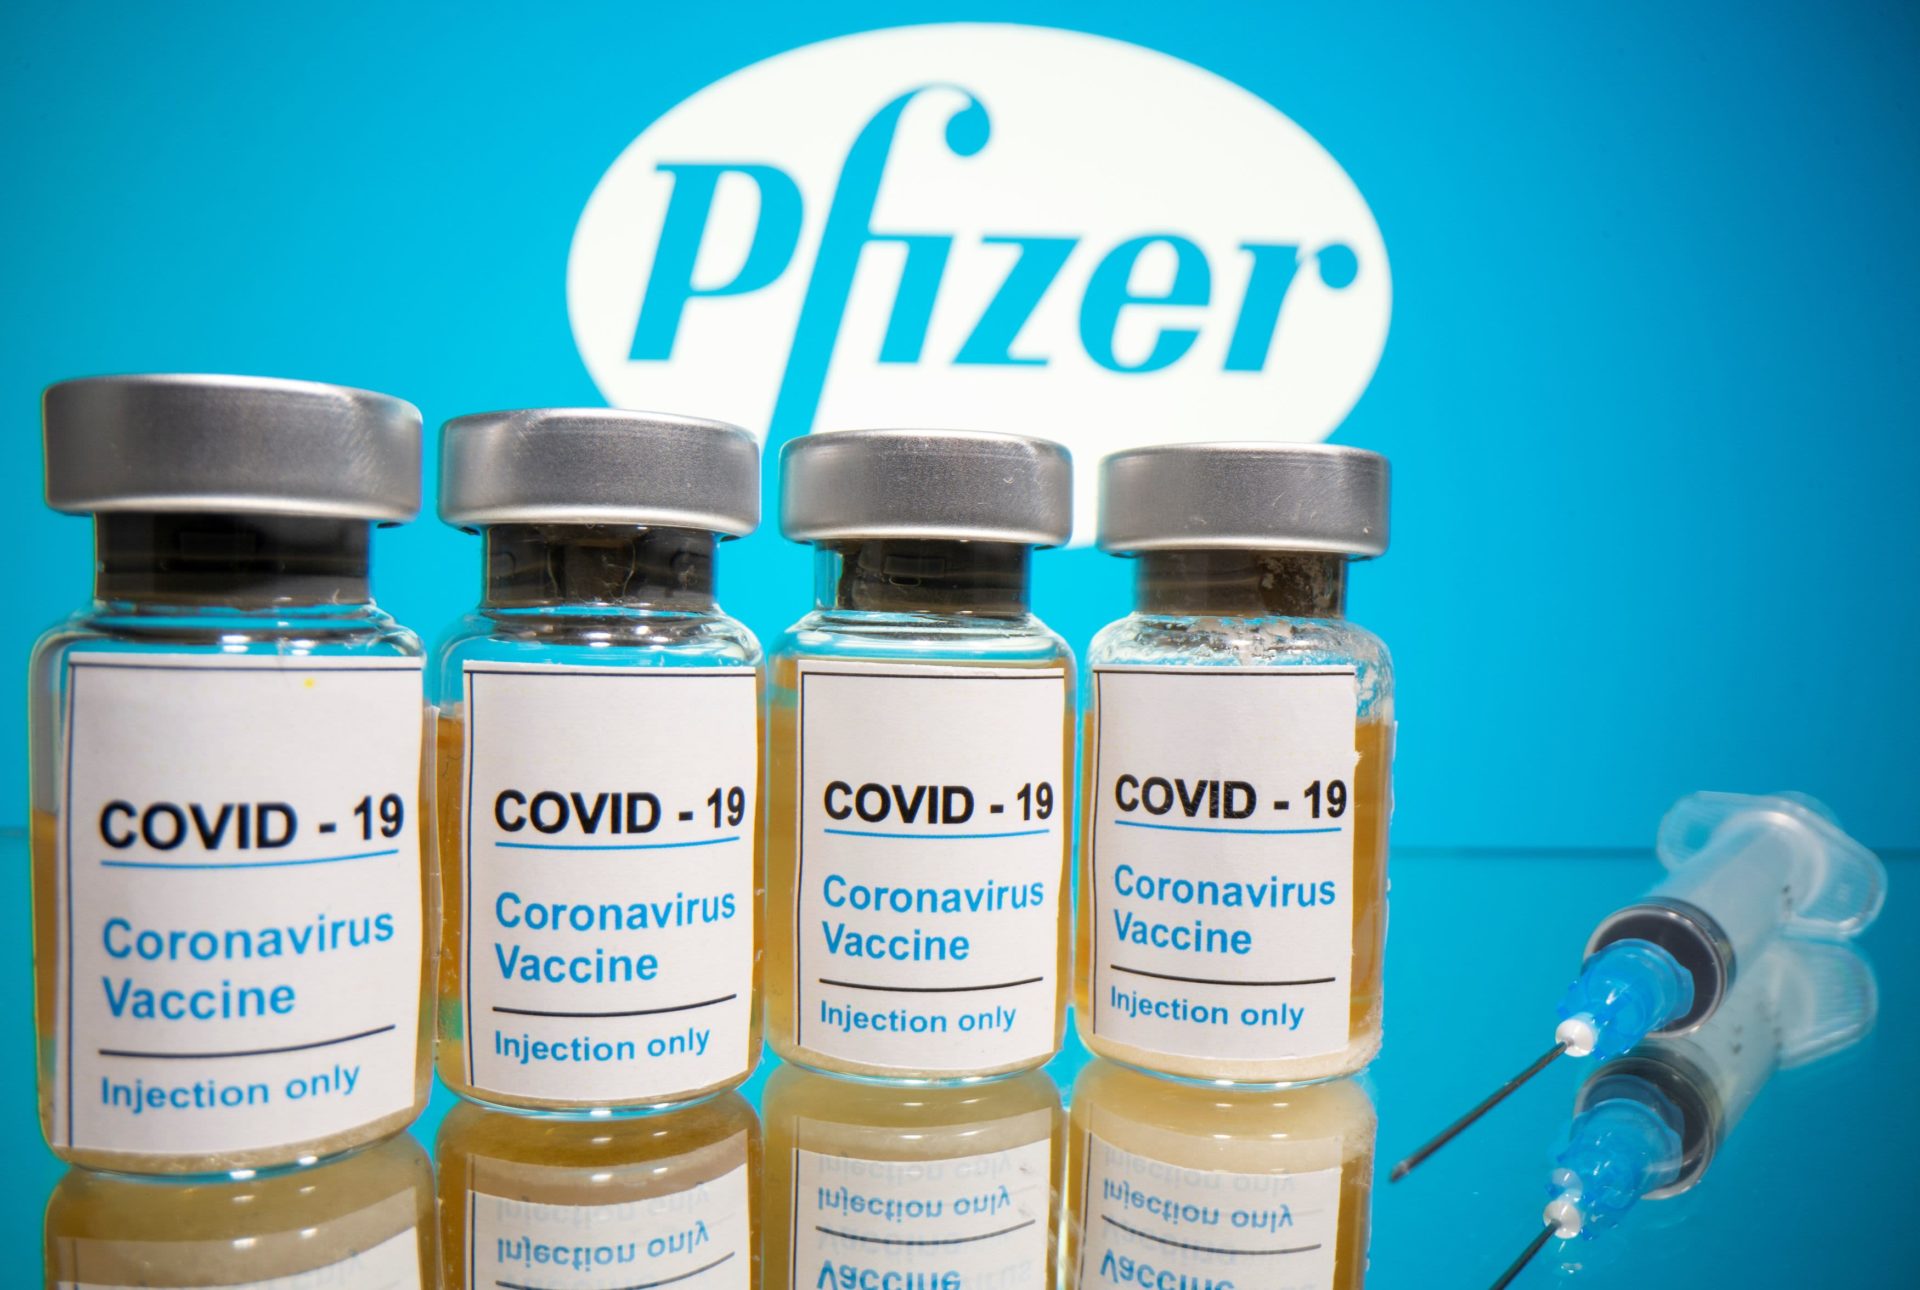 The Pfizer COVID-19 vaccine doesn’t prevent transmission: Antivax disinformation..